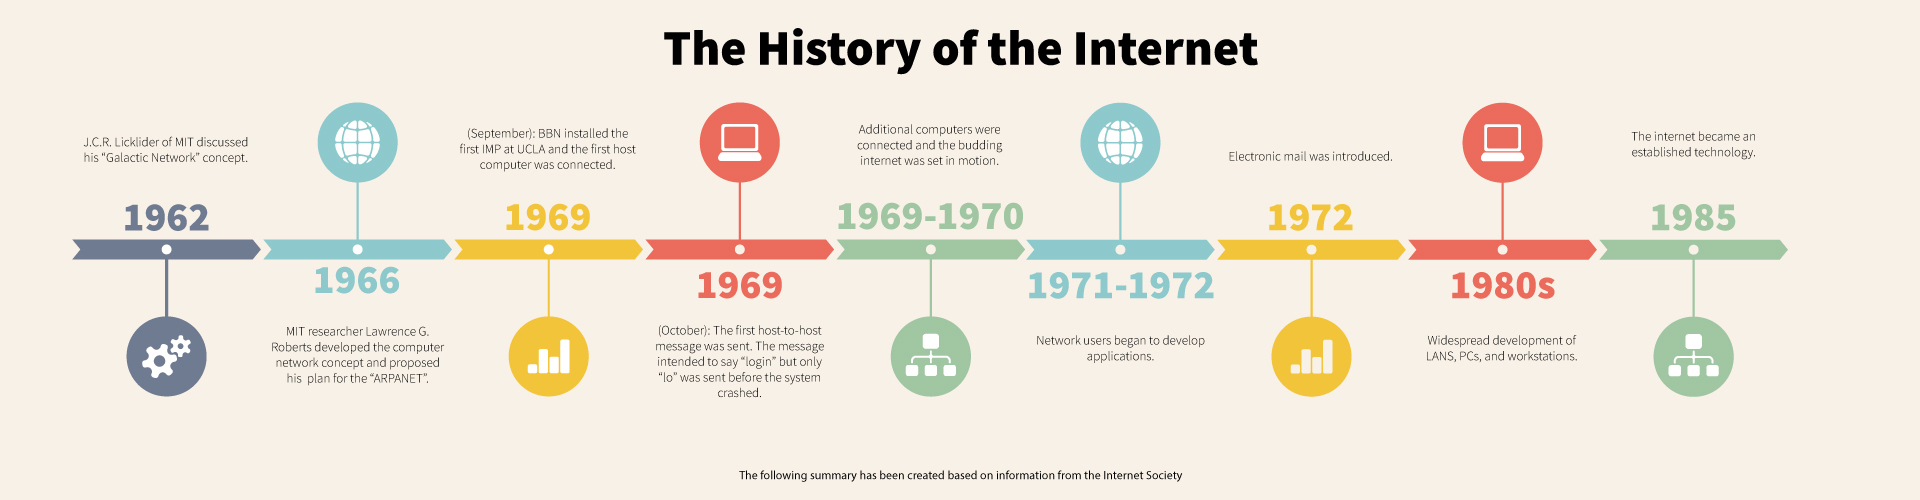 digital community has been developed recently, when looking at an internet timeline